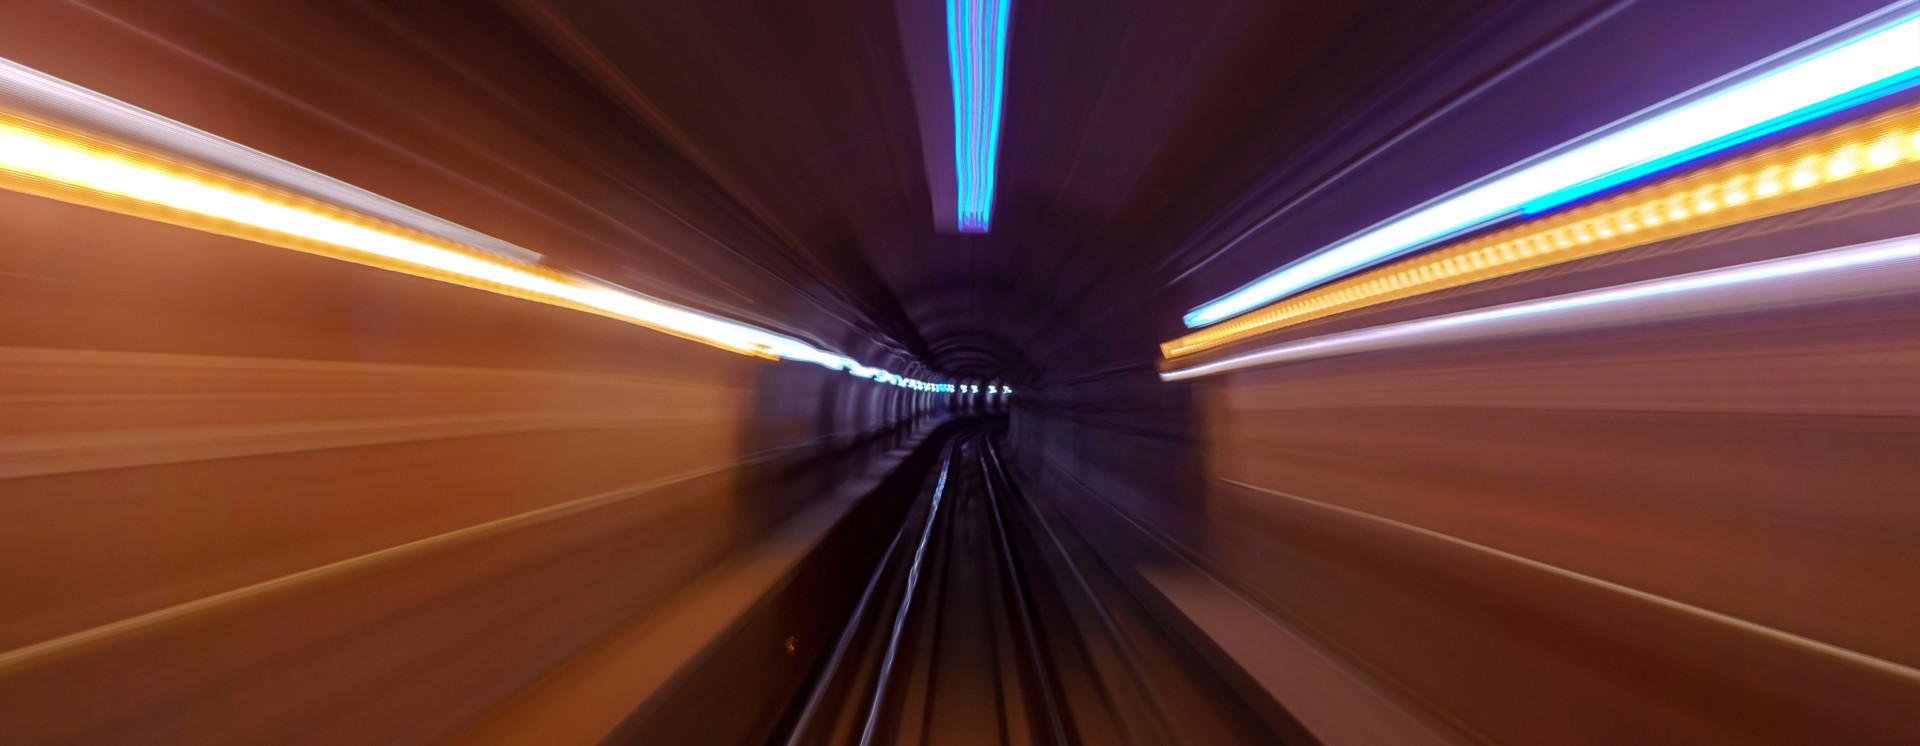 Inside of a railway tunnel at high speed